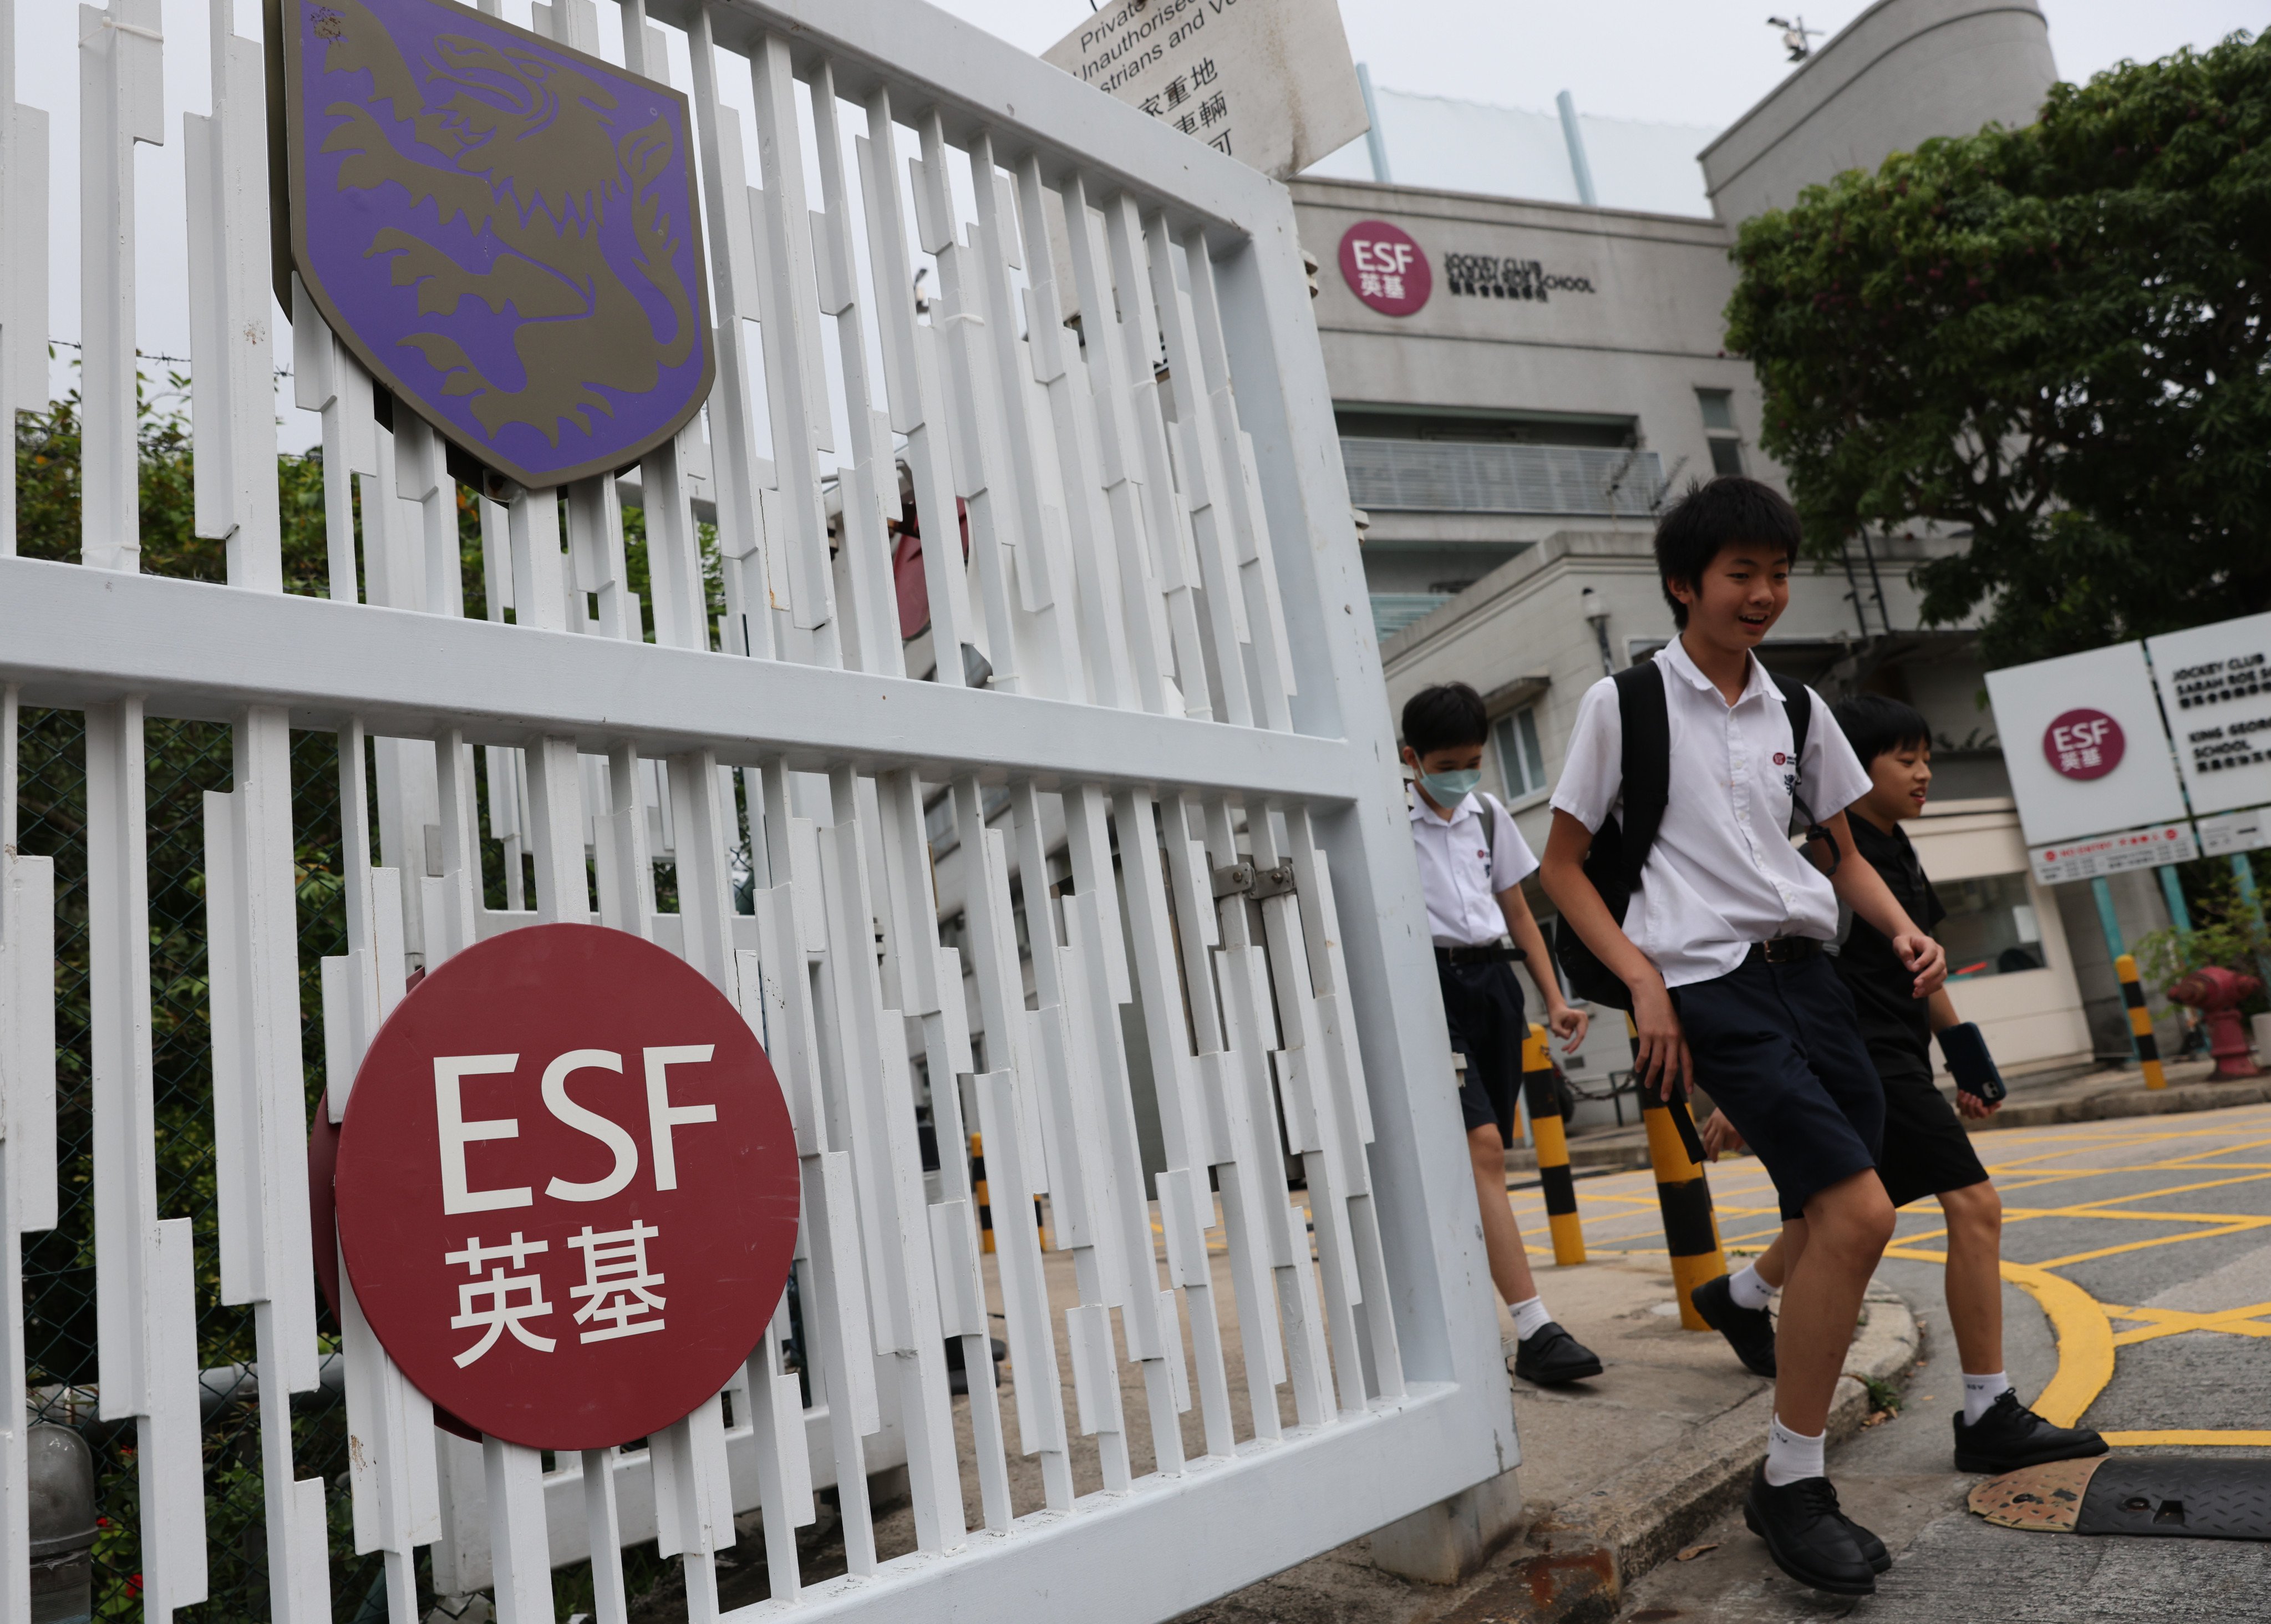 Hong Kong’s ESF international school group plans to raise tuition fees by about 5 per cent. Photo: May Tse